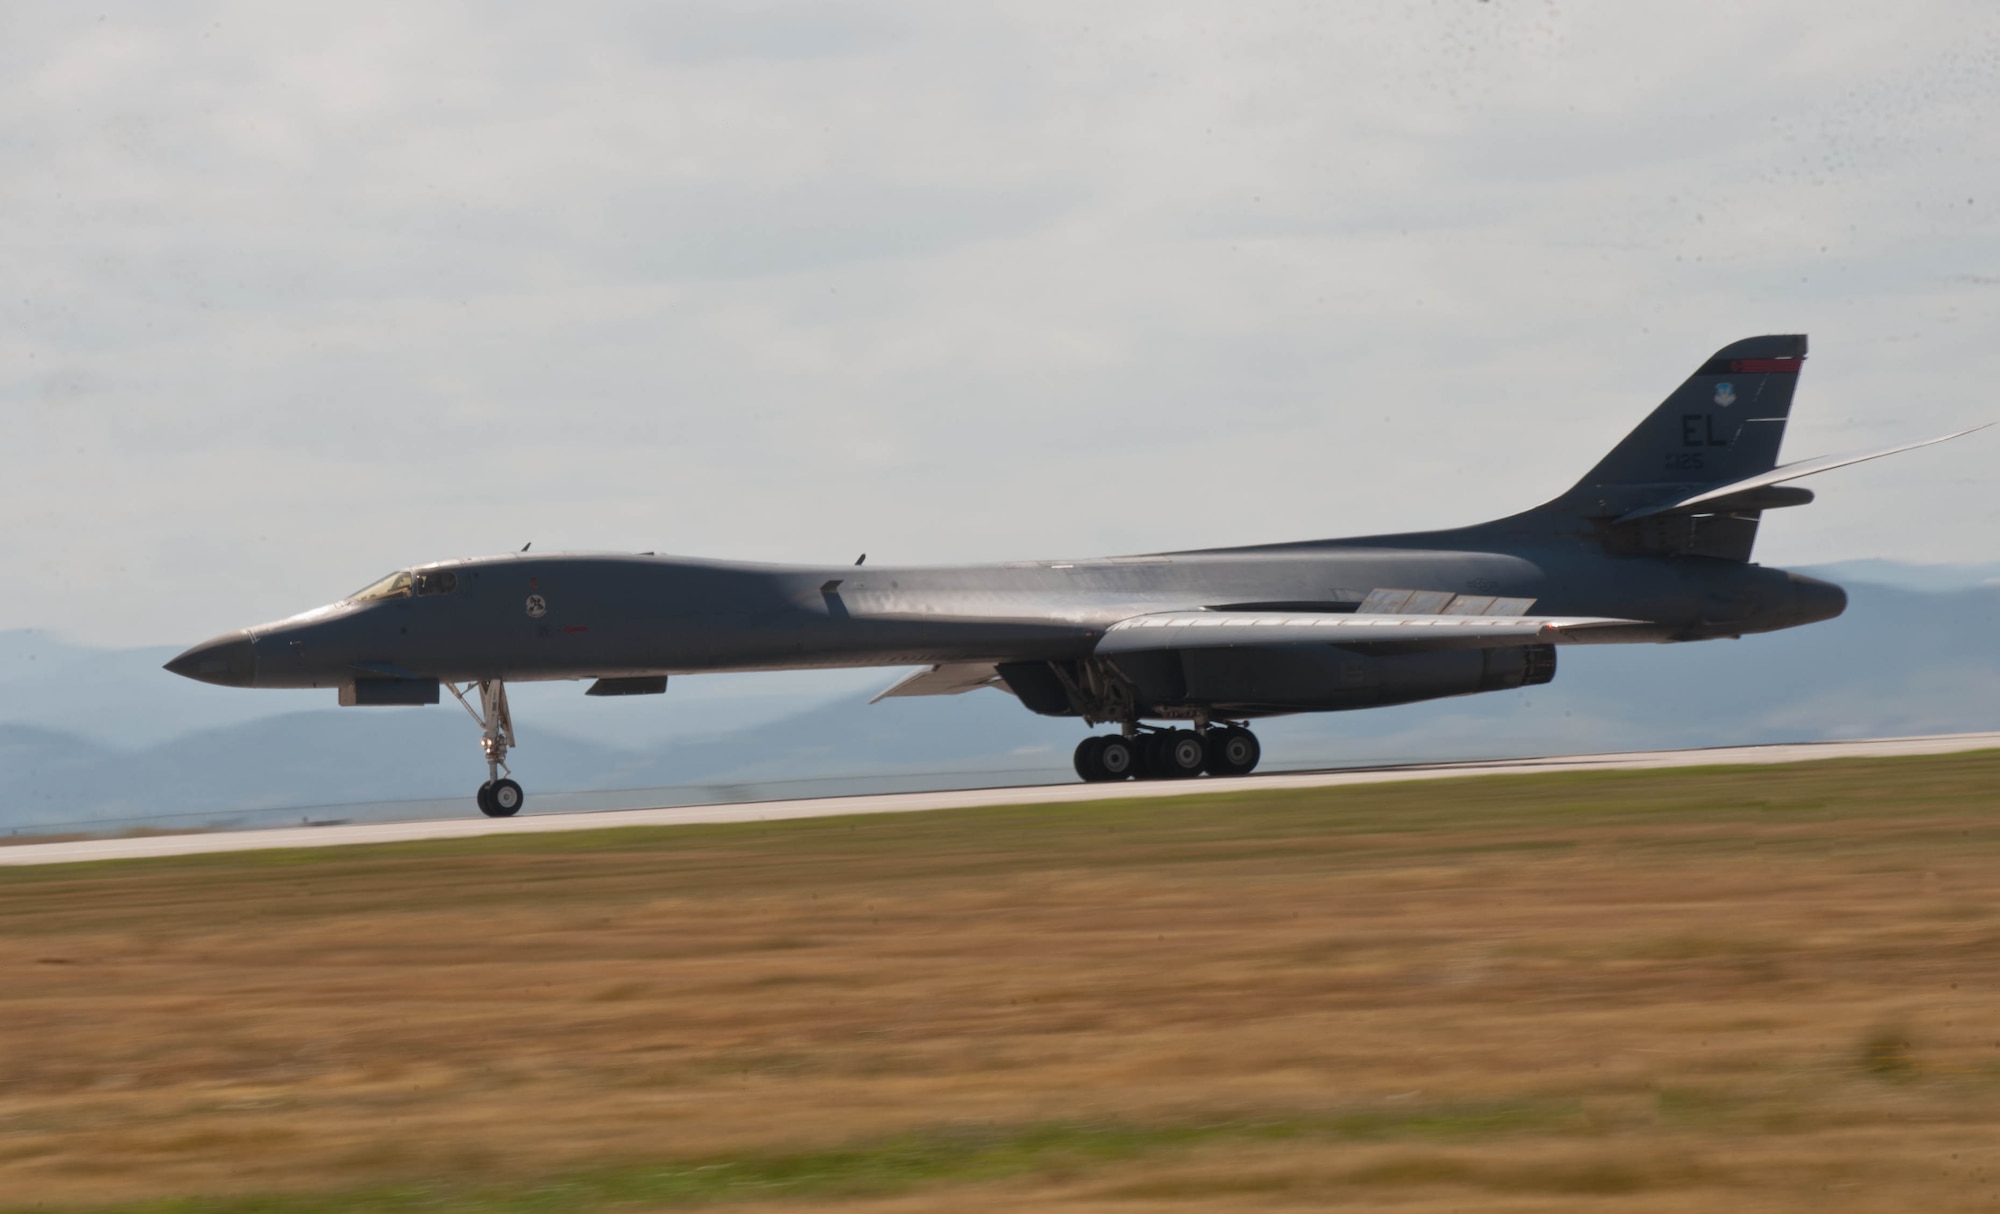 A B-1 bomber piloted by Lt. Col. Timothy Schepper, 28th Operations Group senior evaluator, thunders down the runway at Ellsworth Air Force Base, S.D., July 15, 2013. Schepper, who passed the 5,000 flying hours mark during a return flight from Southwest Asia, is the first B-1 aviator to reach the milestone in that aircraft. (U.S. Air Force photo by Airman 1st Class Zachary Hada/Released)